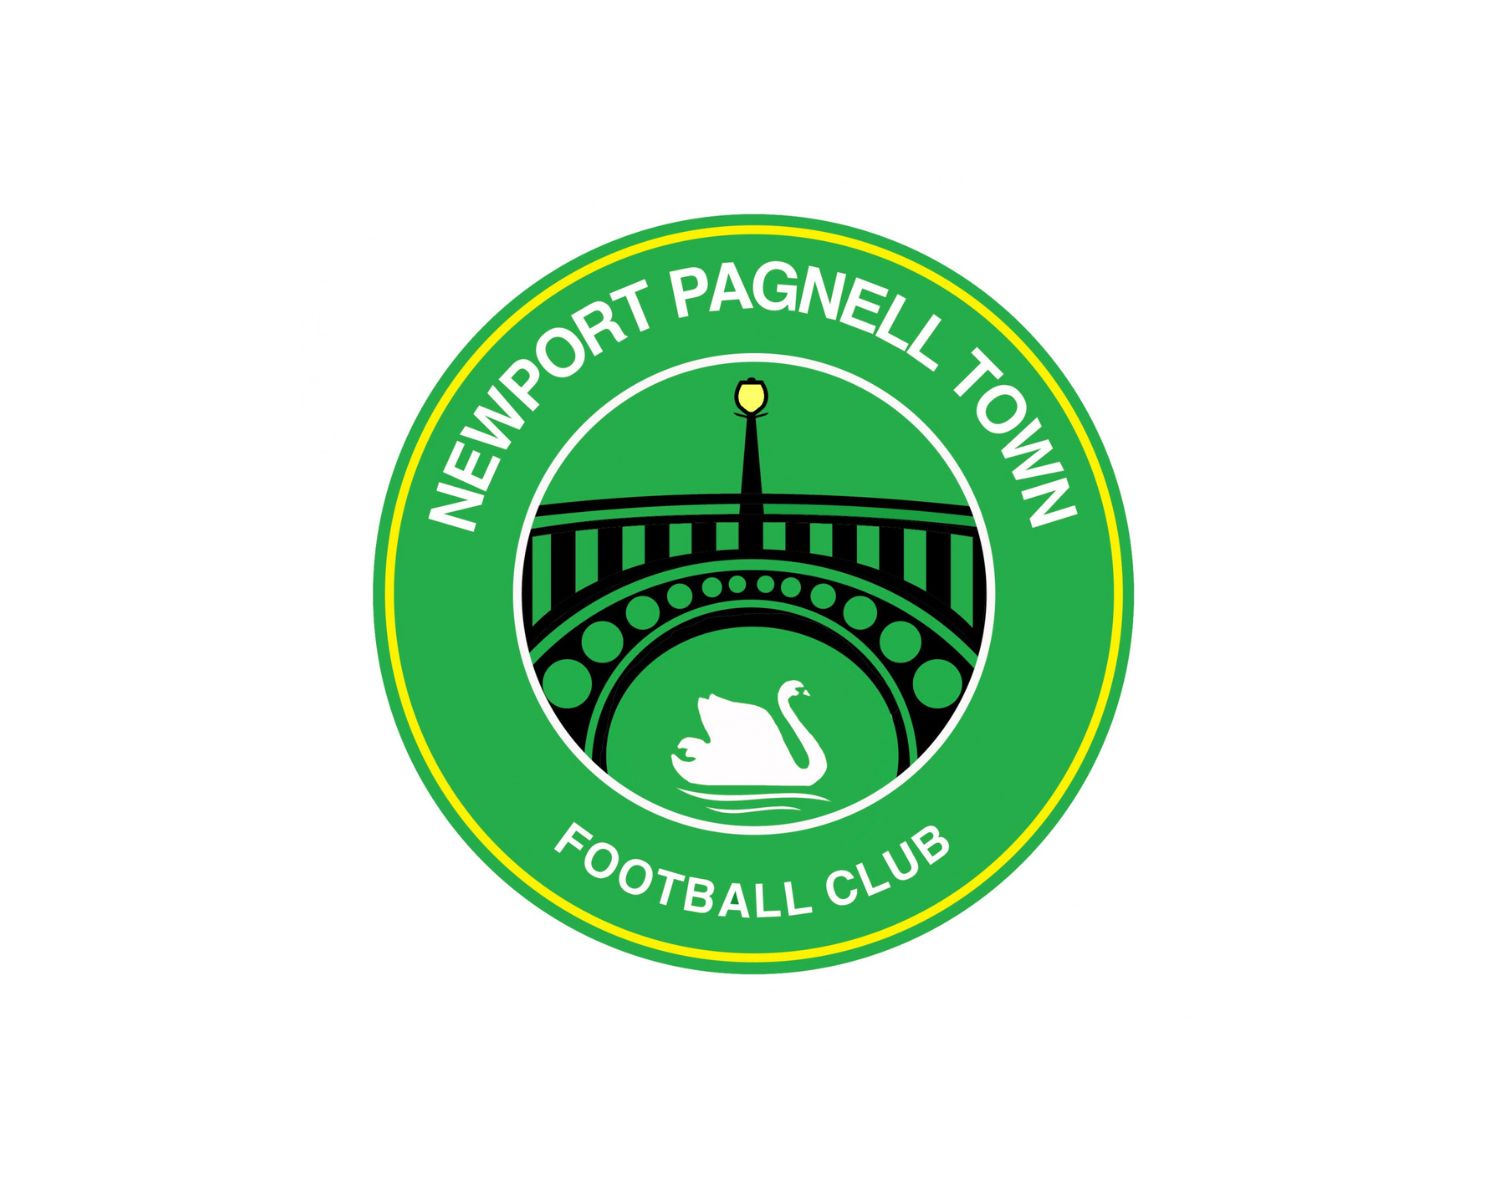 newport-pagnell-town-fc-16-football-club-facts